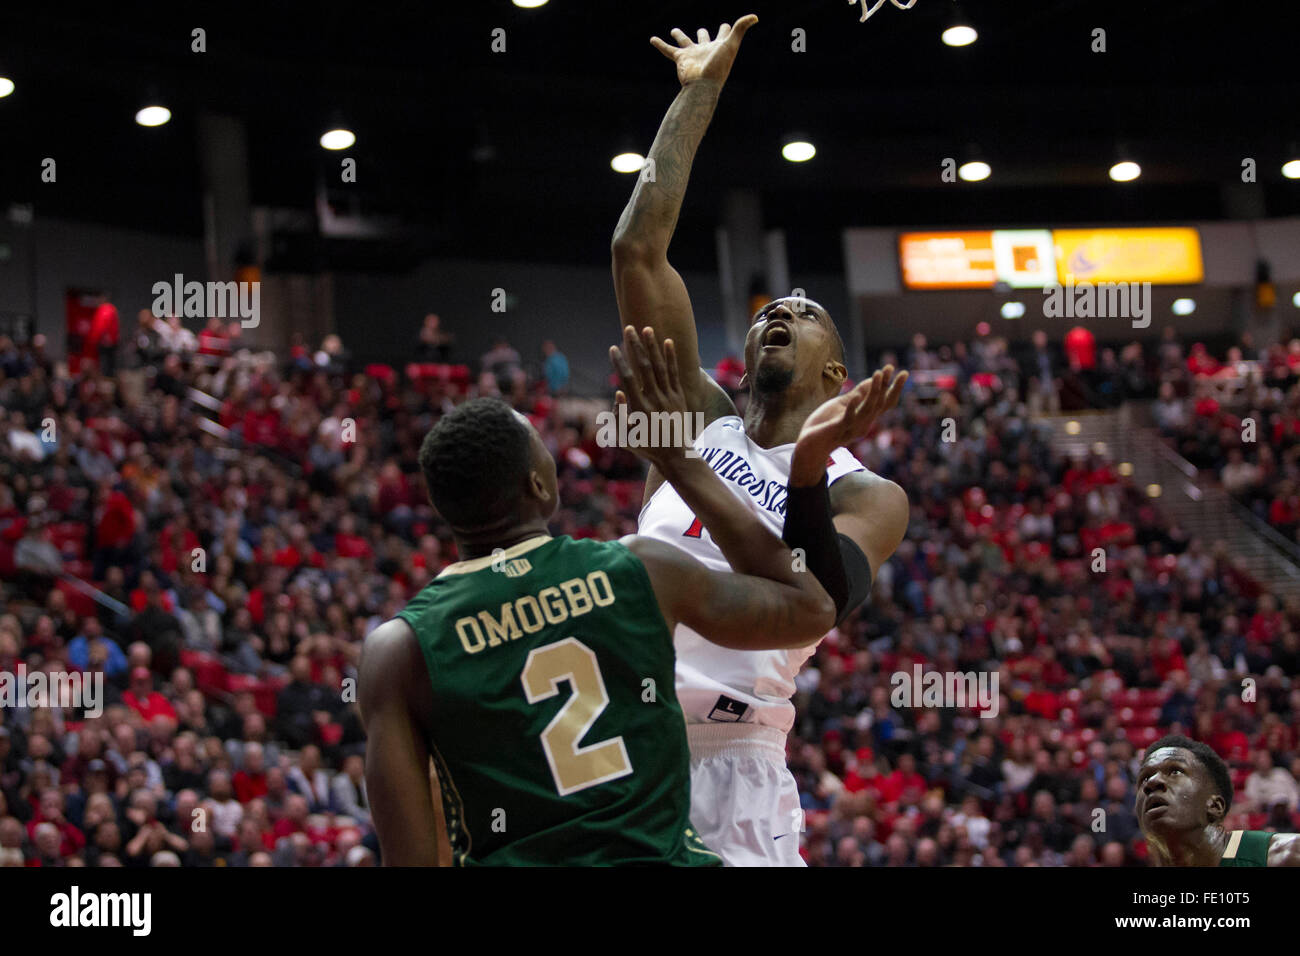 San Diego, California, USA. 2nd Feb, 2016. February 2, 2016] SDSU forward Winston Shepard hits a layup in Tuesday's game between San Diego State University and Colorado State University. Chadd Cady/For The San Diego Union-Tribune © Chadd Cady/U-T San Diego/ZUMA Wire/Alamy Live News Stock Photo